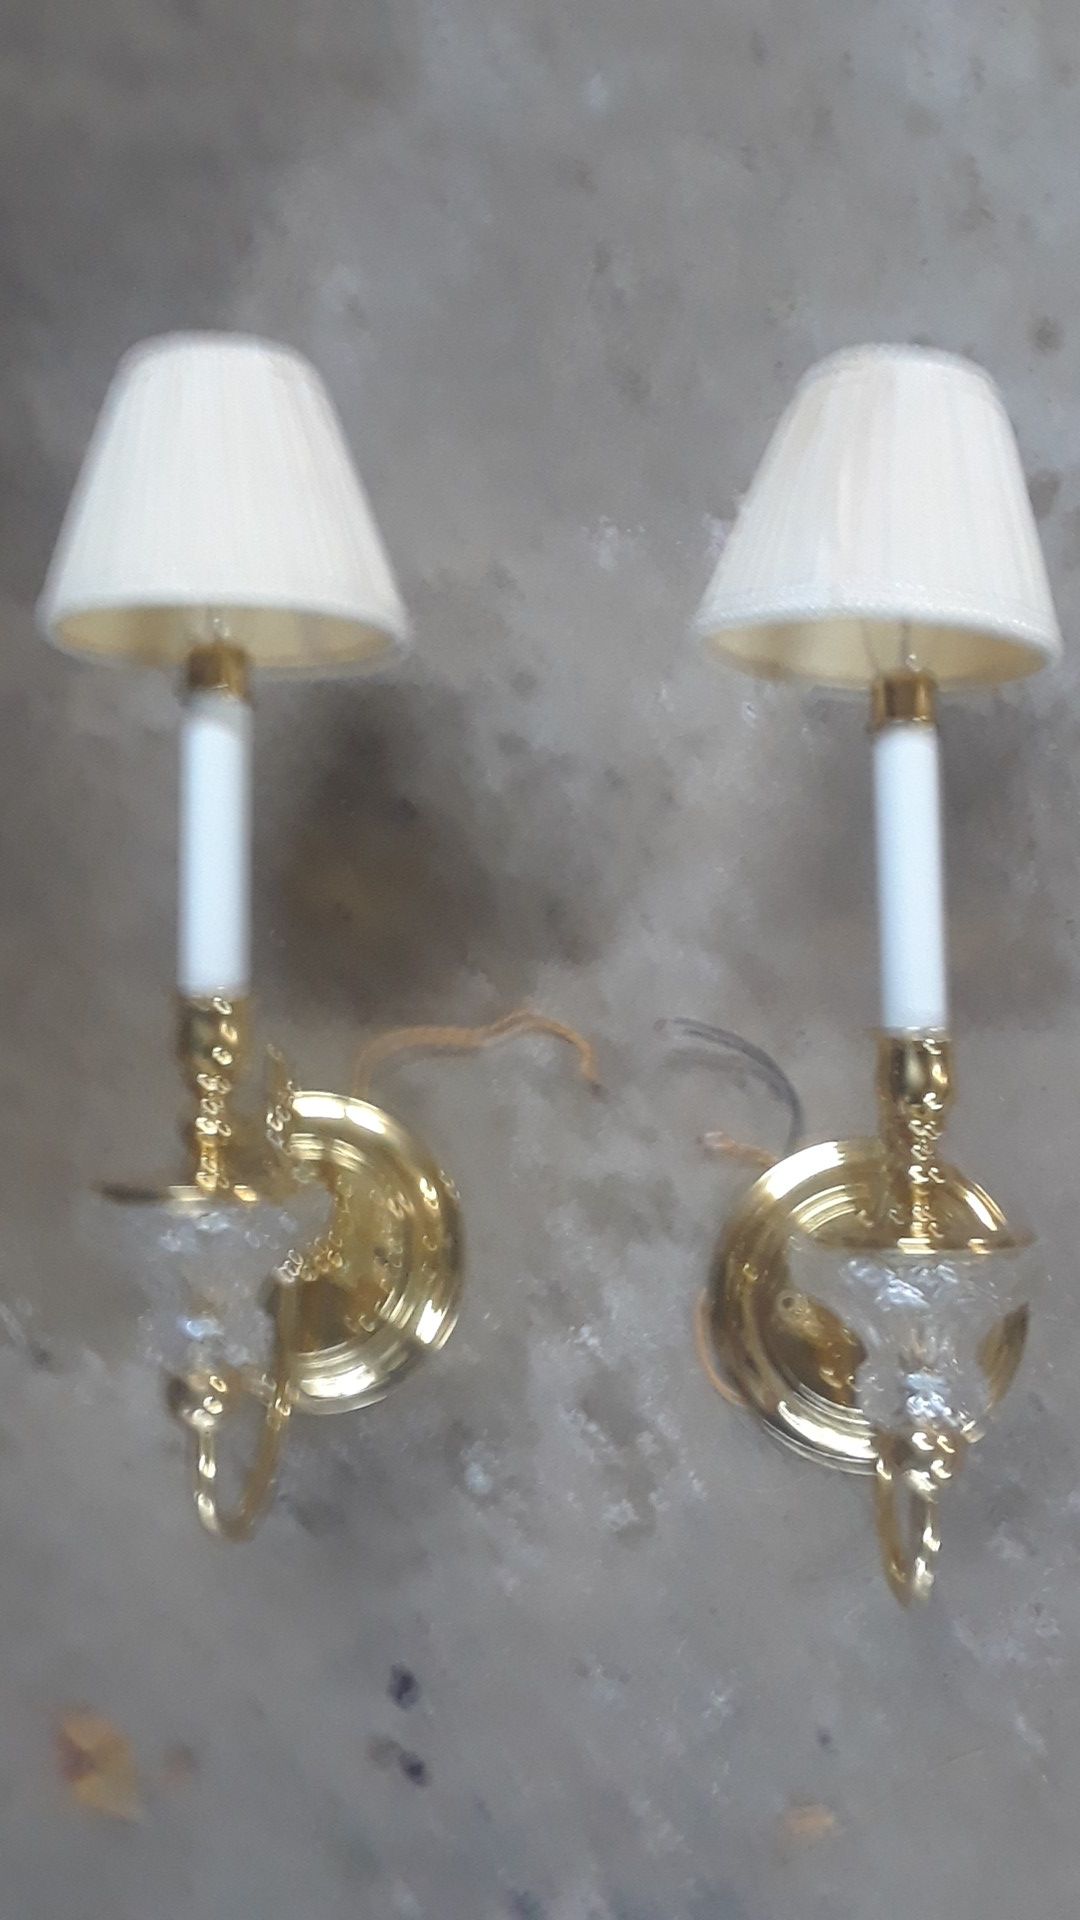 Two solid brass candle light light fixtures